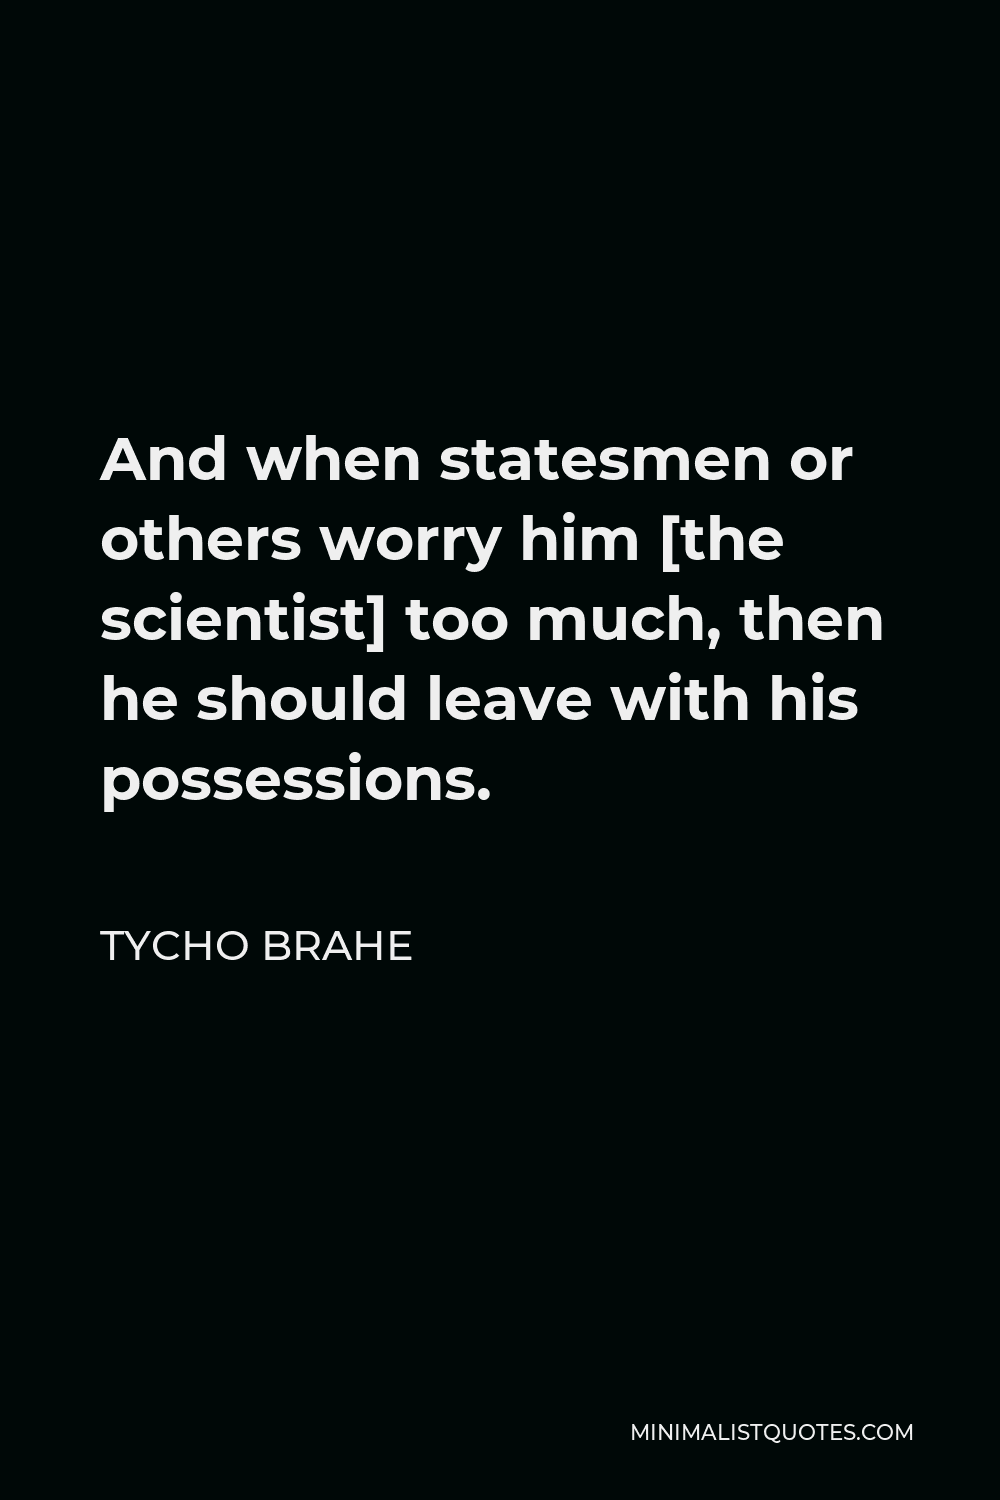 Tycho Brahe Quote - And when statesmen or others worry him [the scientist] too much, then he should leave with his possessions.